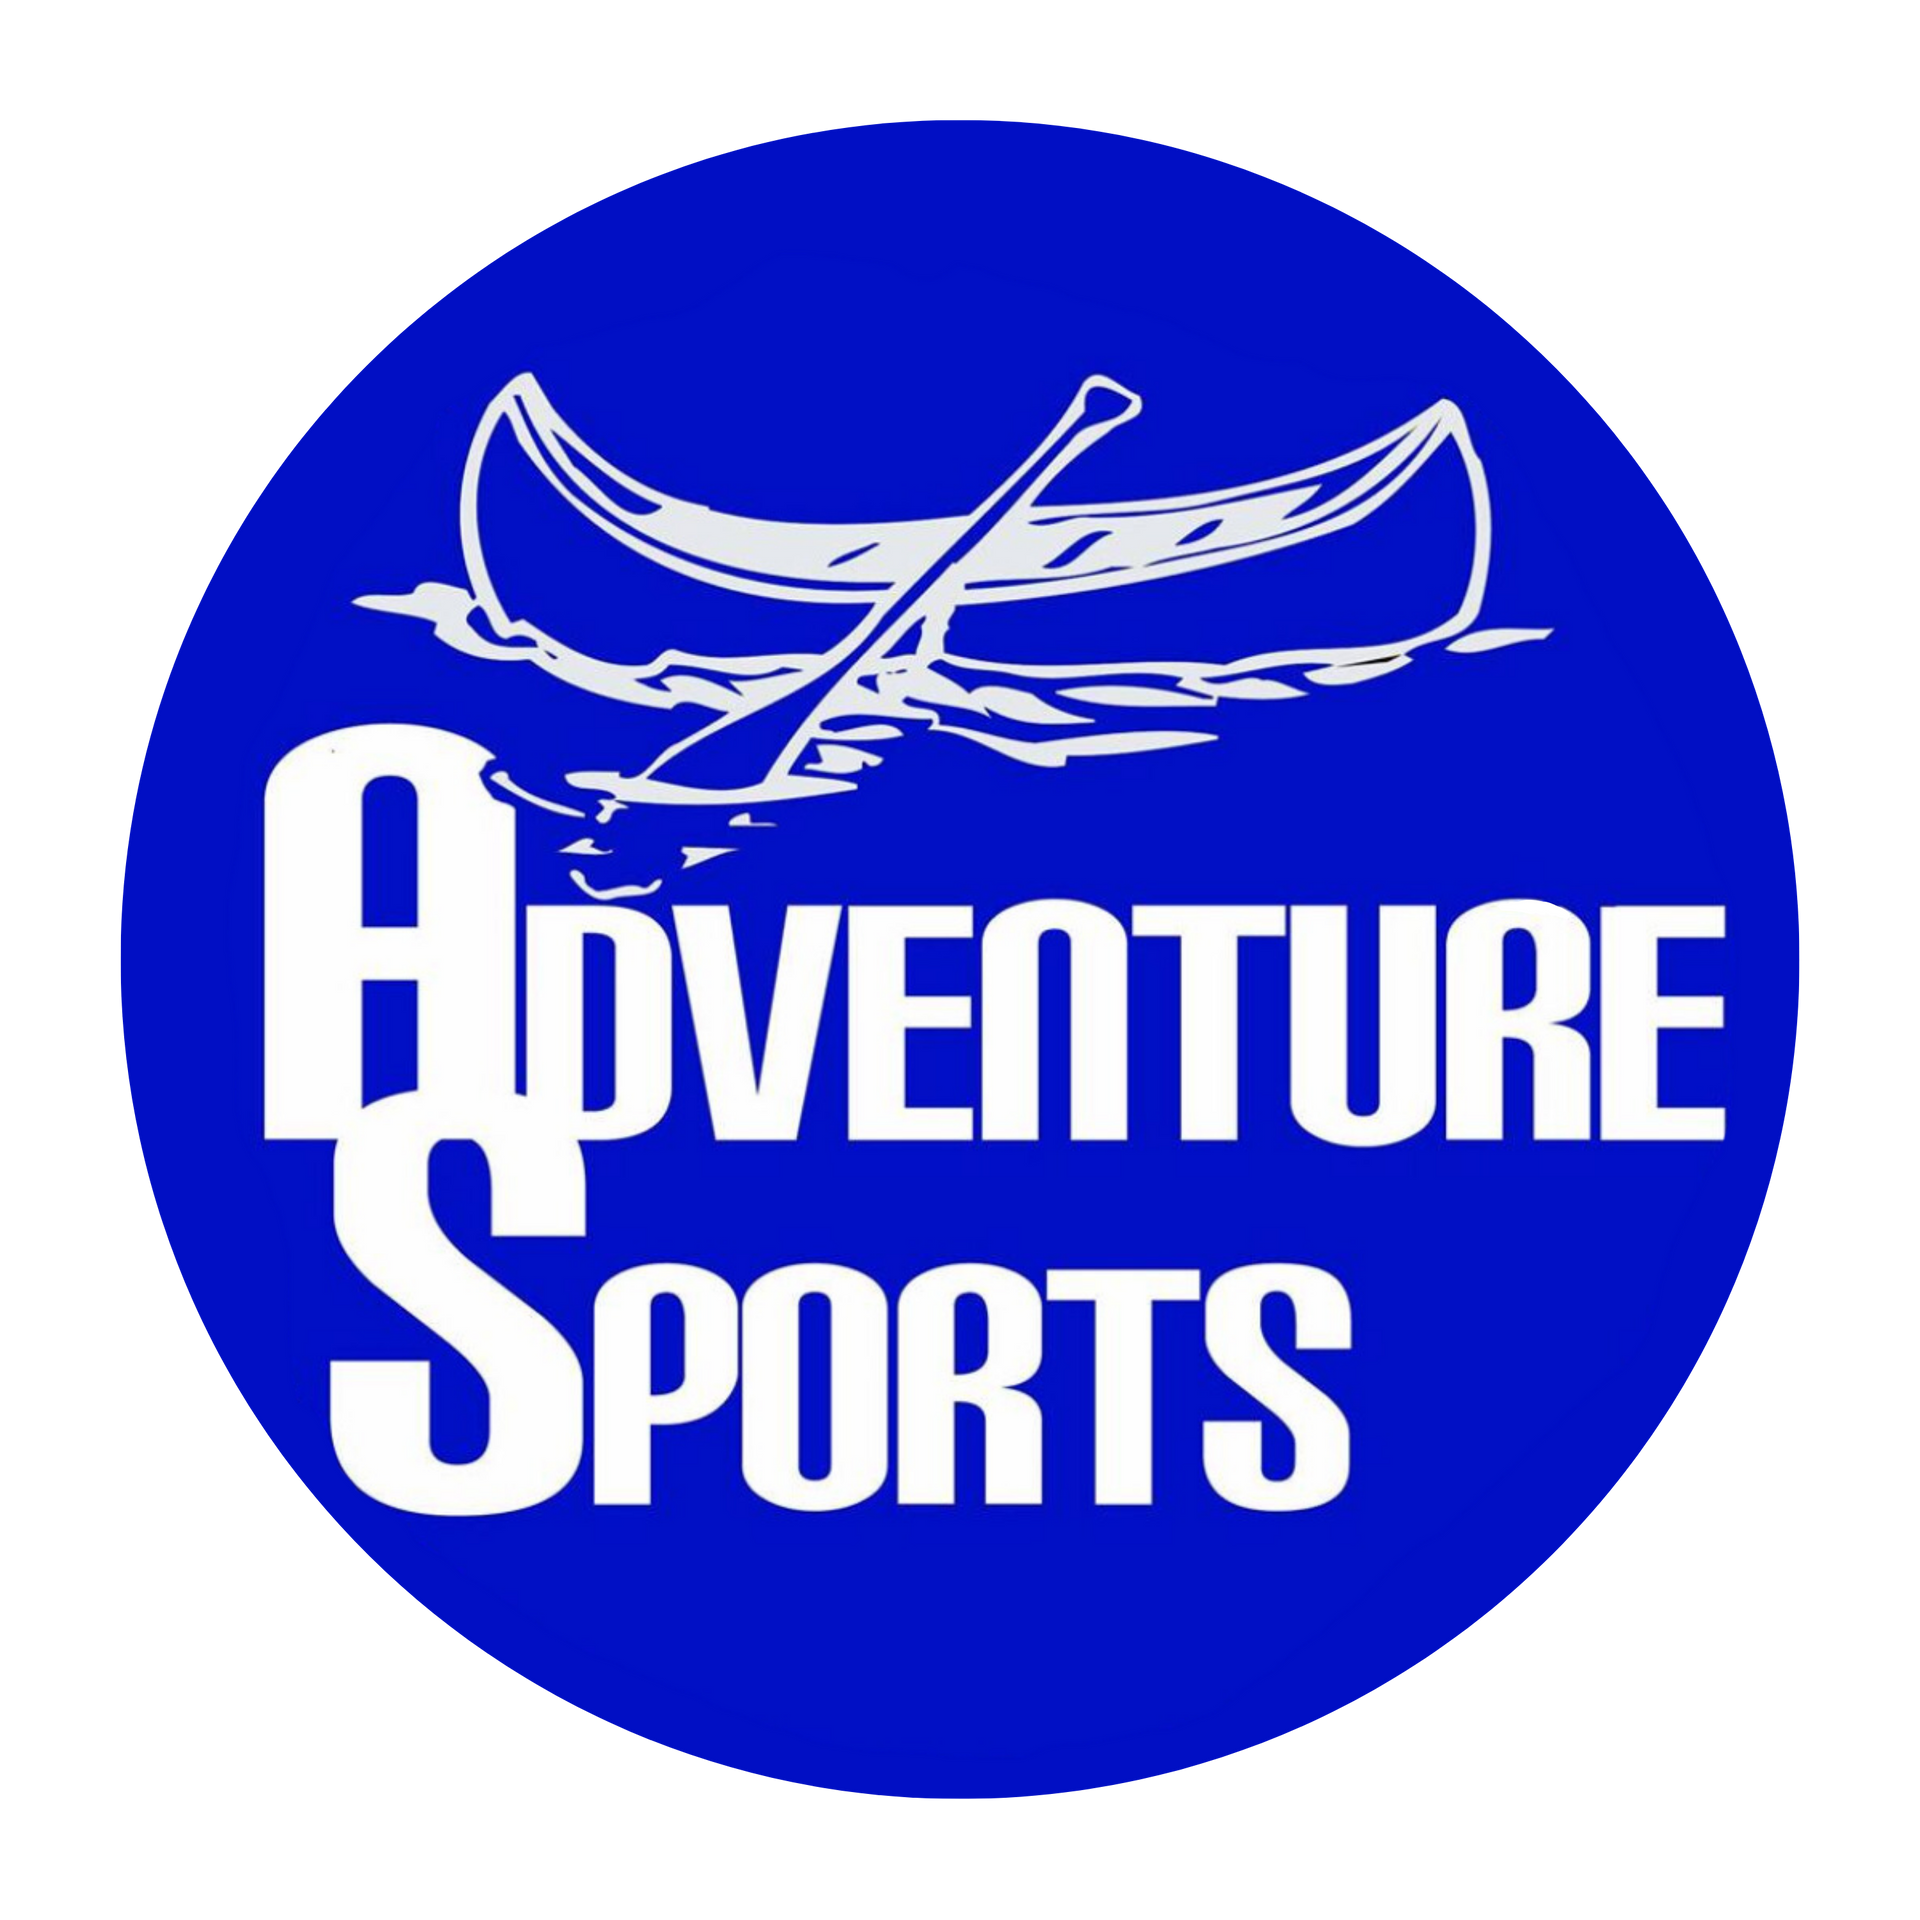 The blue logo for adventure sports with white text